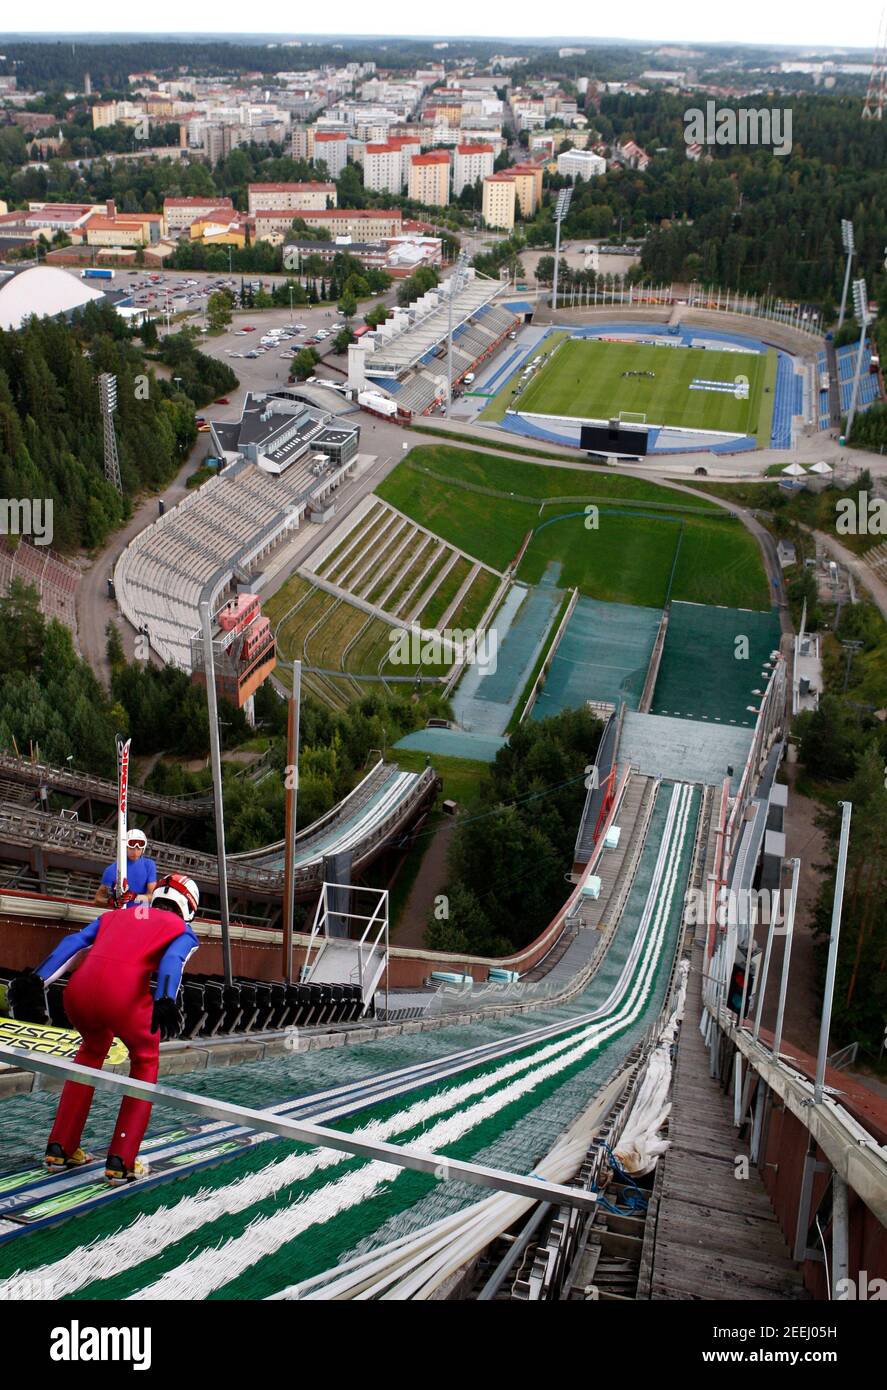 Football - England v Italy UEFA Women's European Championship Finland 2009 Group C  - Lahti Stadium, Finland - 25/8/09  General view of a ski jump in front of Lahti Stadium  Mandatory Credit: Action Images / John Sibley  Livepic Stock Photo